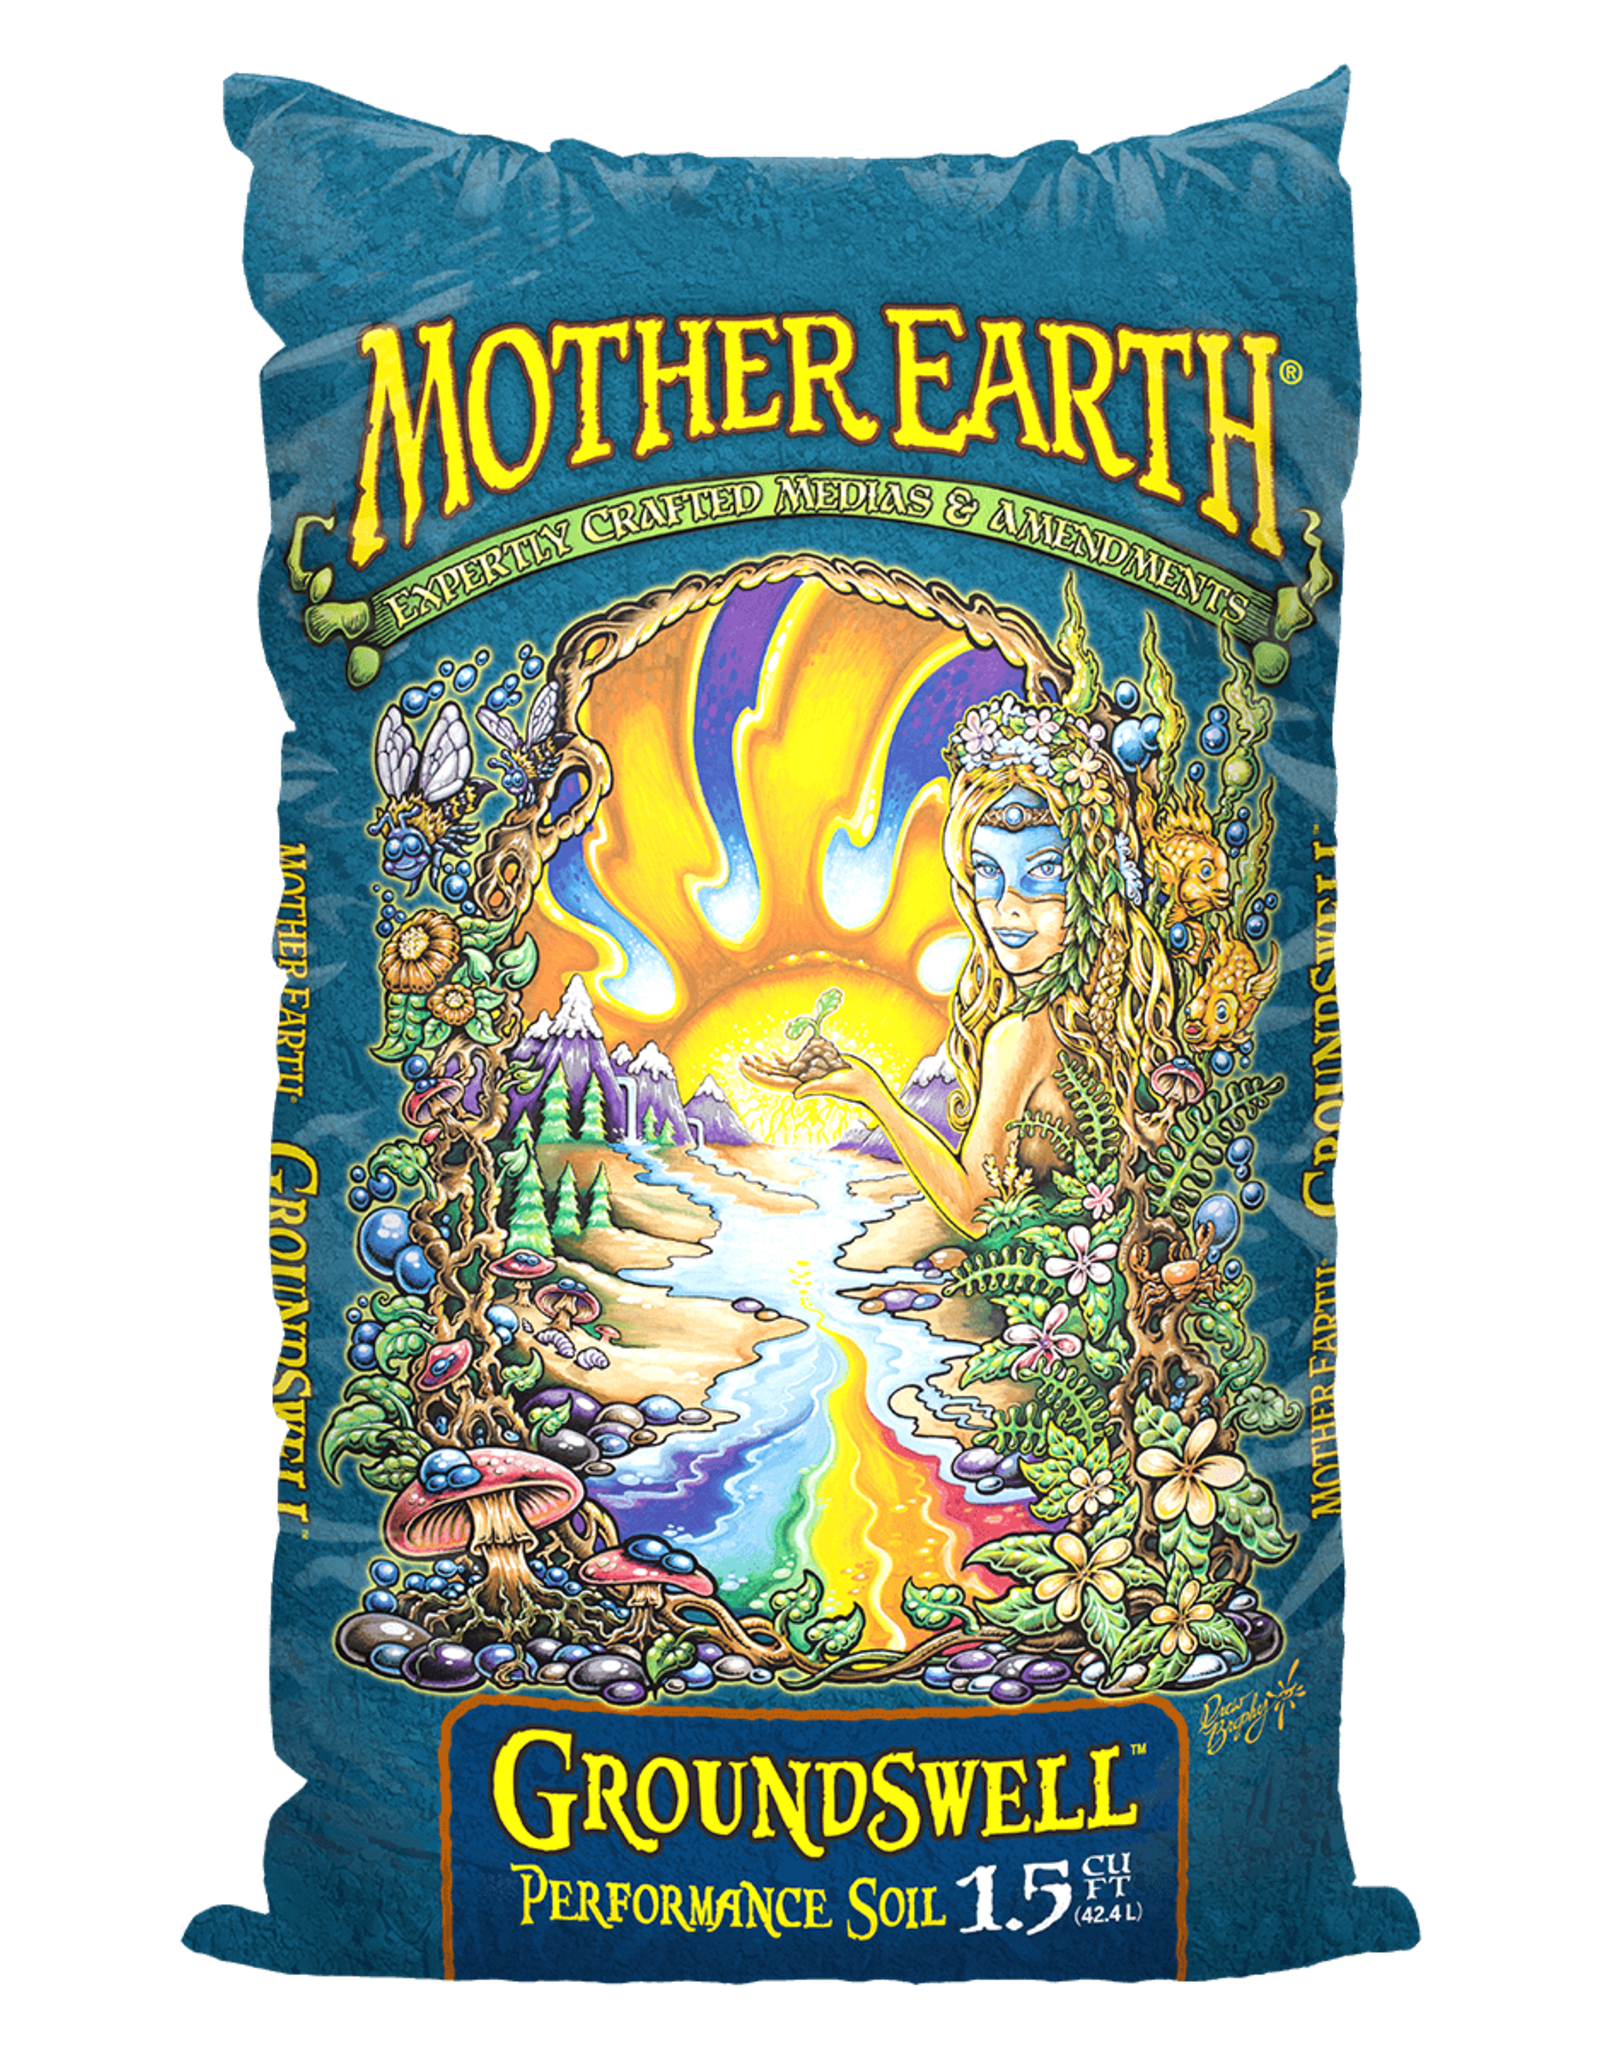 Mother Earth Mother Earth Groundswell 1.5 cu ft